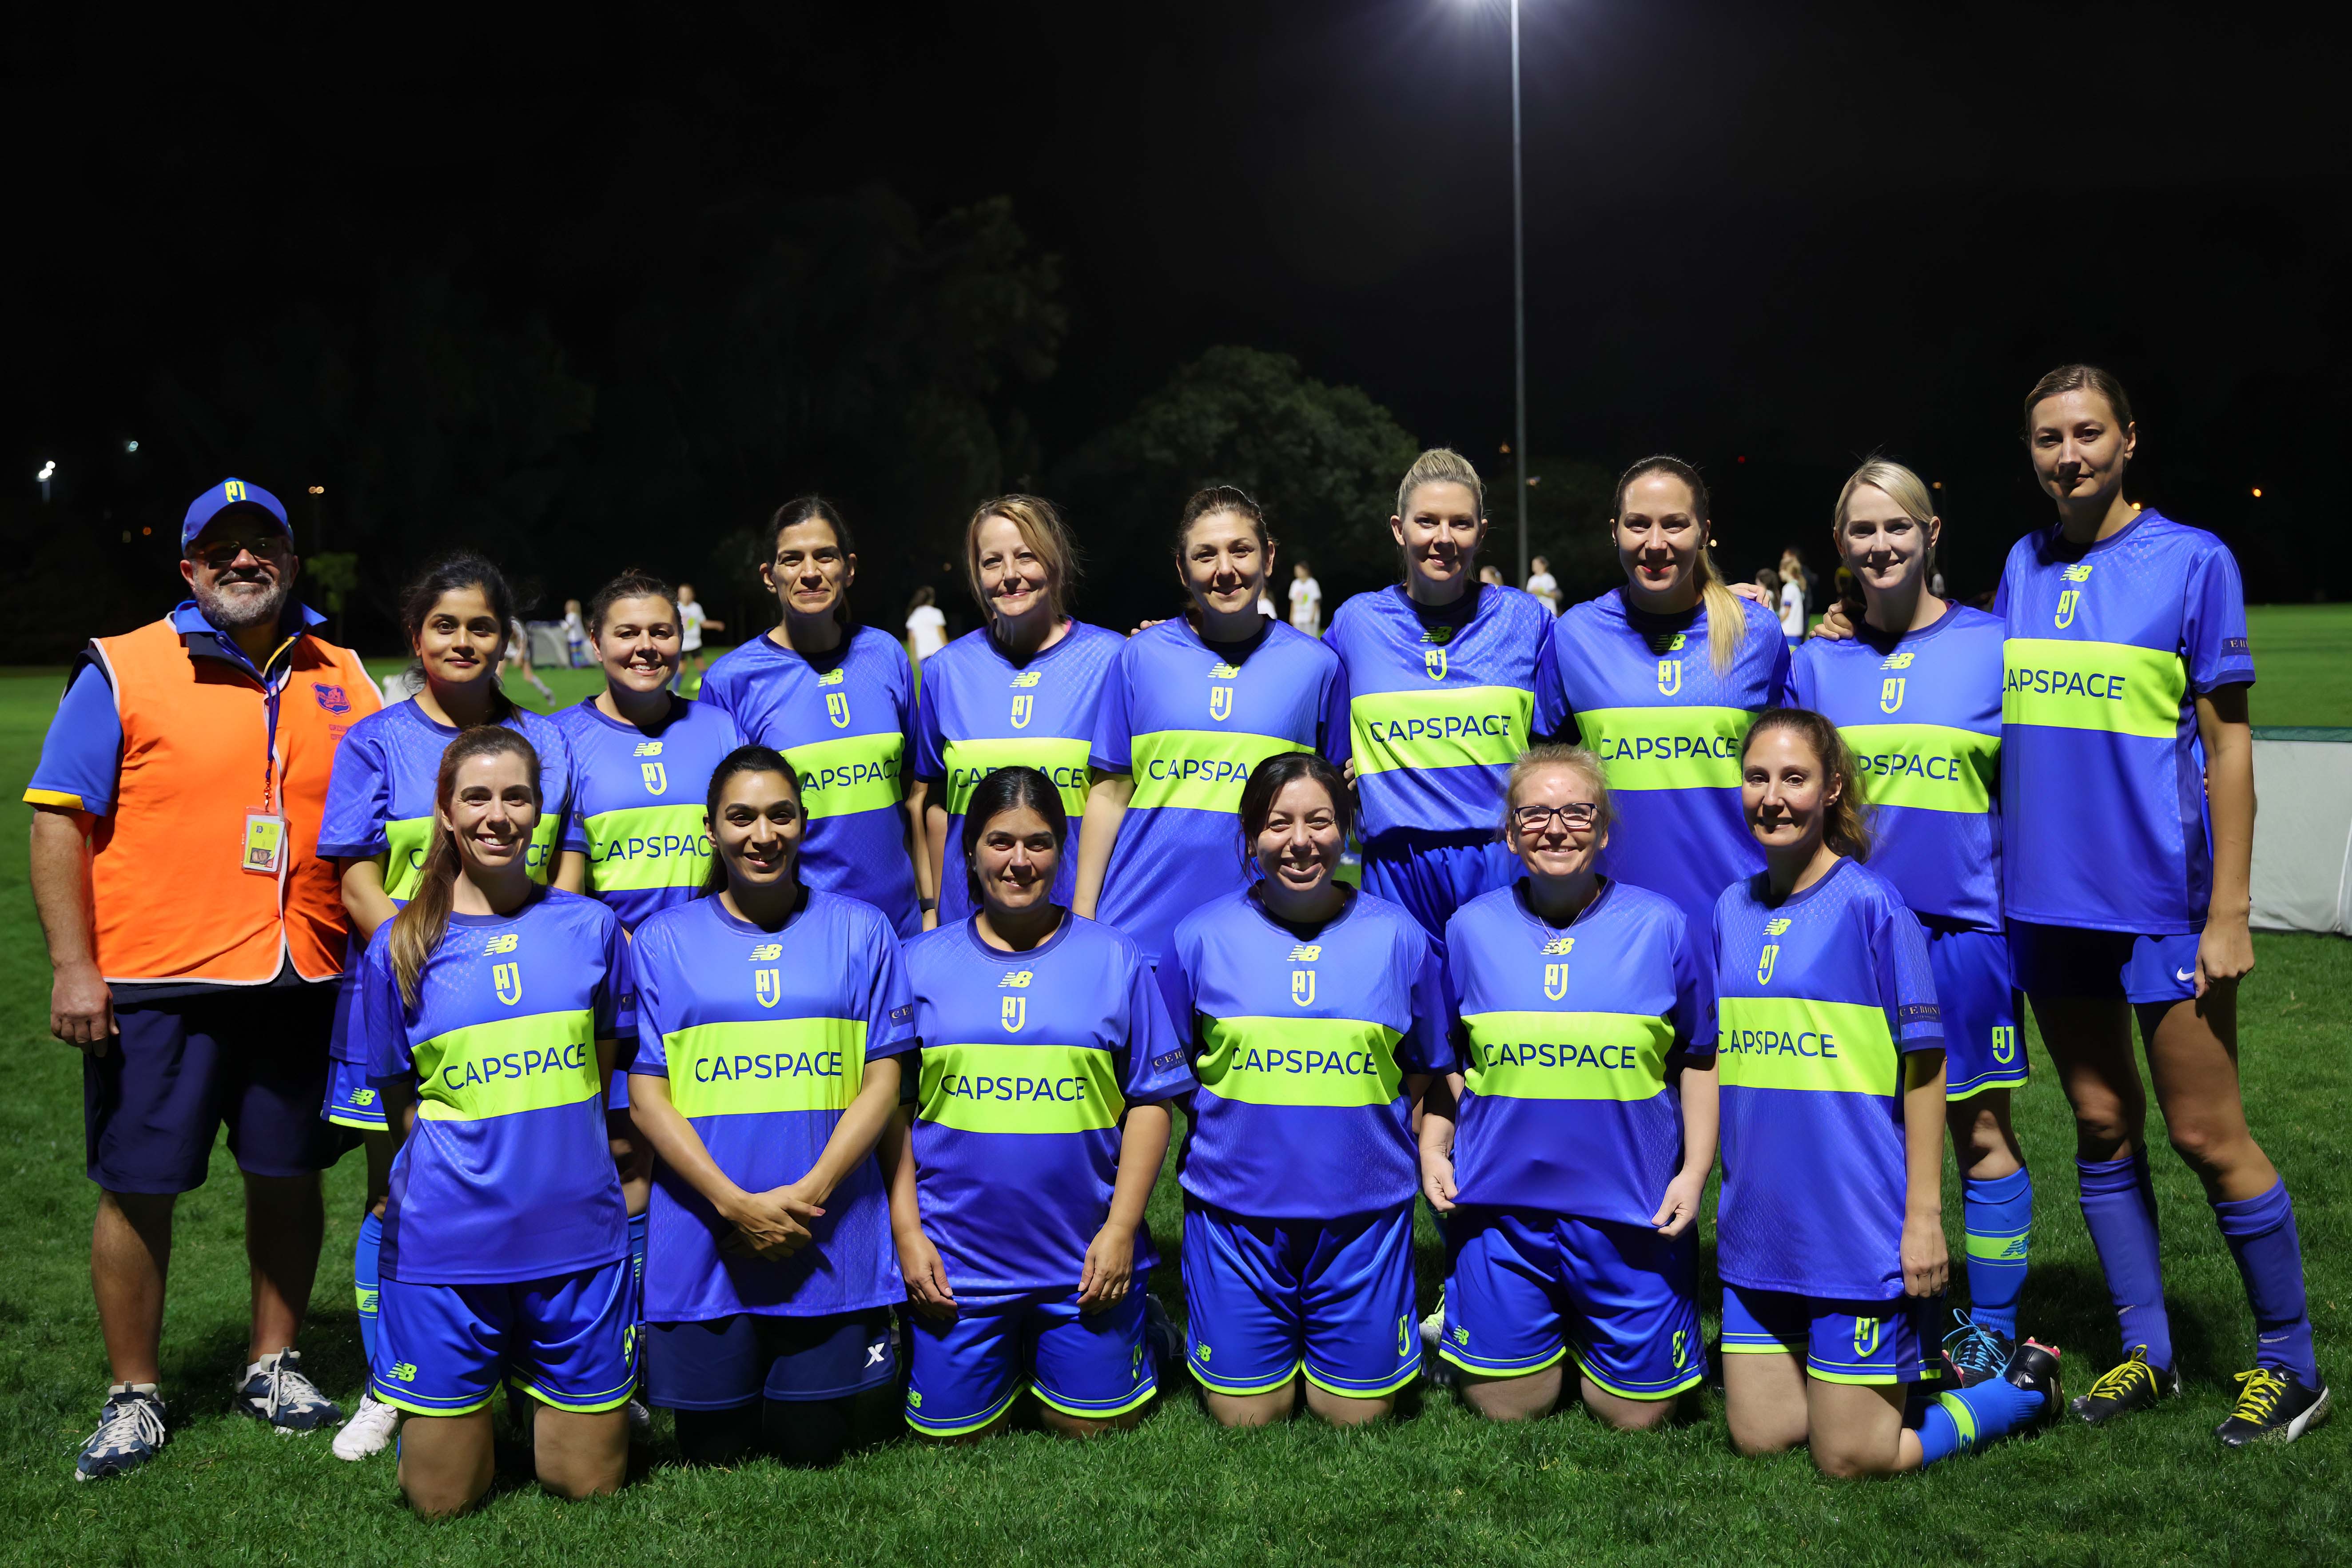 Abbotsford JFC Over 35's Team during the AFC Women’s Football Day Celebrations